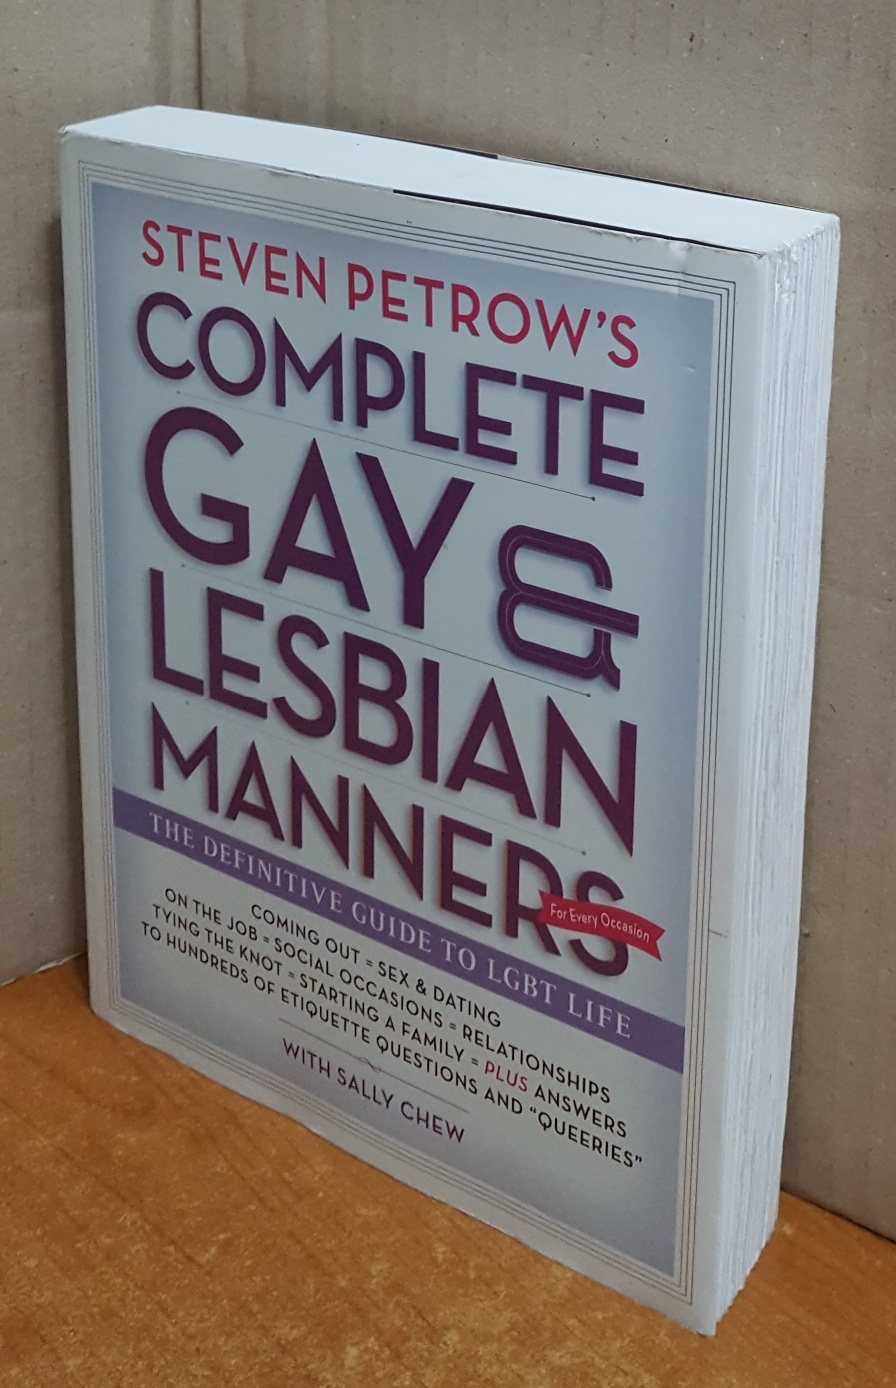 Steven Petrow‘s Complete Gay &amp Lesbian Manners: The Definitive Guide to LGBT Life